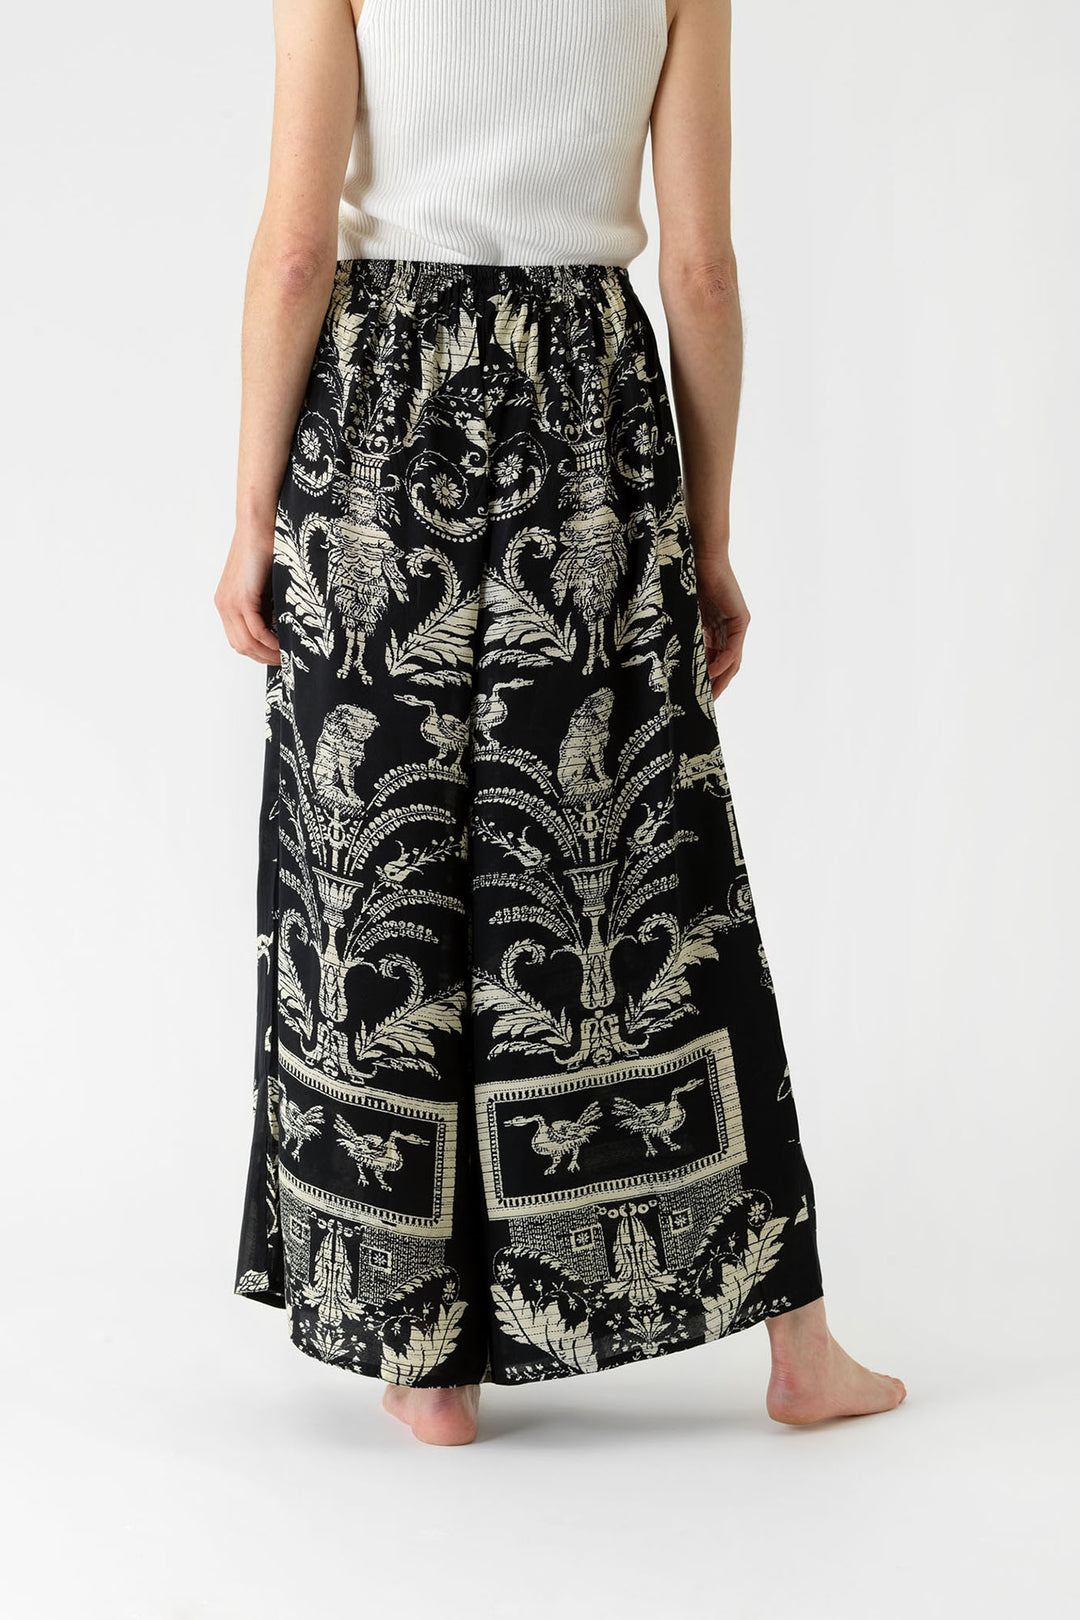 Black and White Damask Print Palazzo Pants with Fold-Over Waist, Small